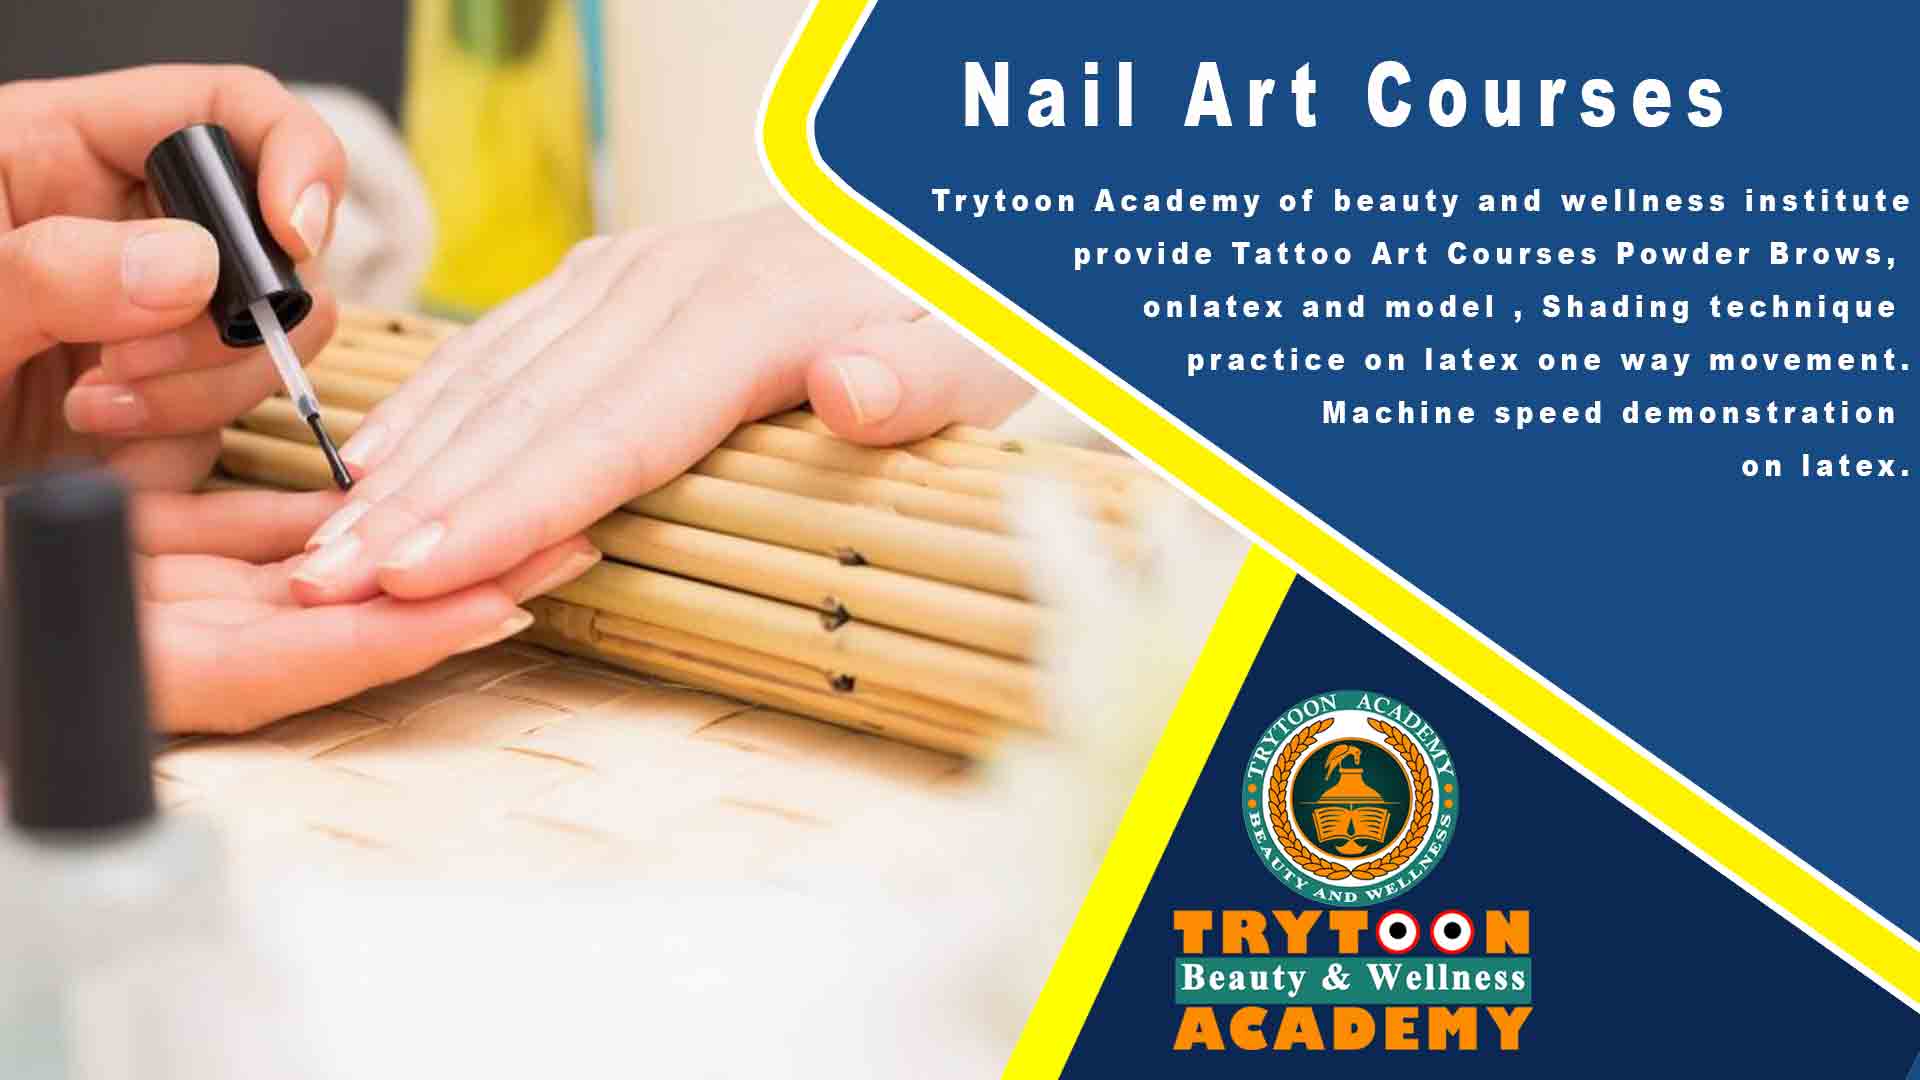 4. Nail Art Course at West Delhi Beauty Academy - wide 7